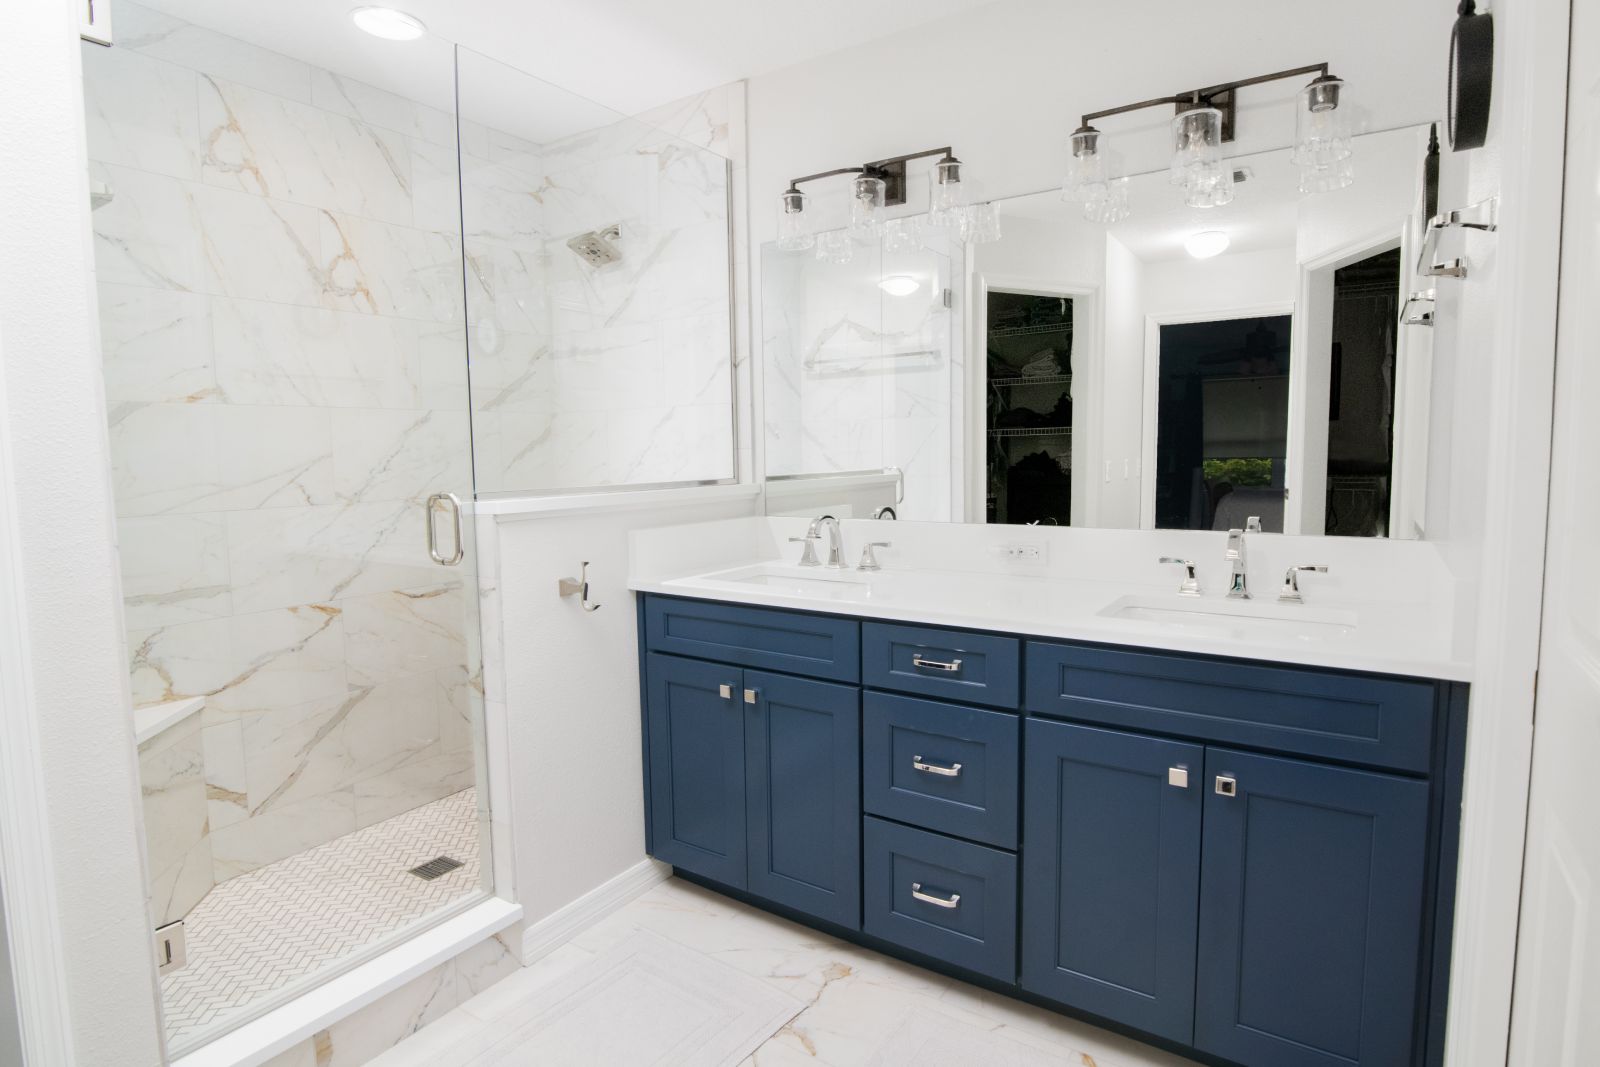 3 Things to Consider Before You Start Your Bathroom Remodeling Project